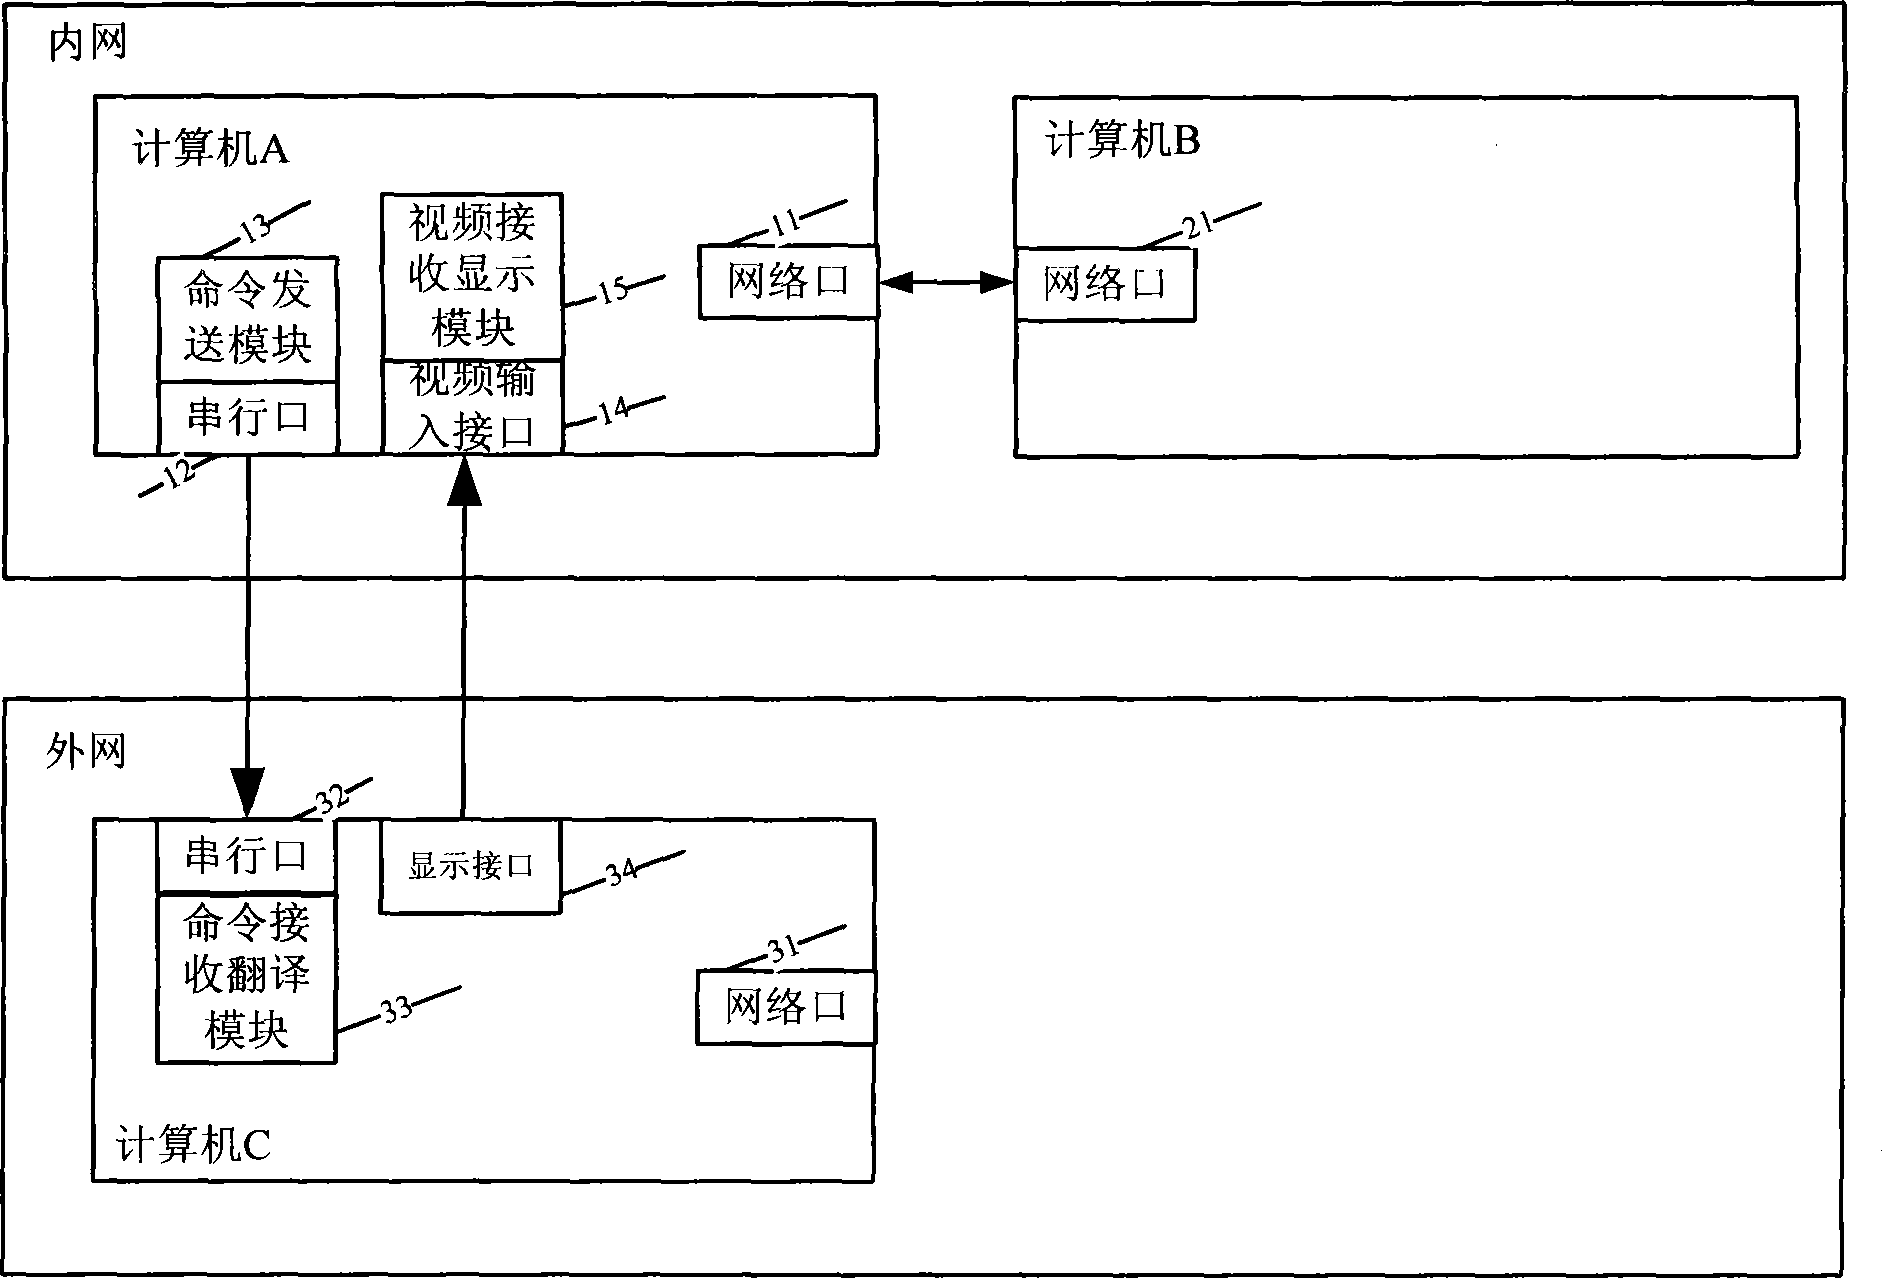 Resource sharing method for internal and external network